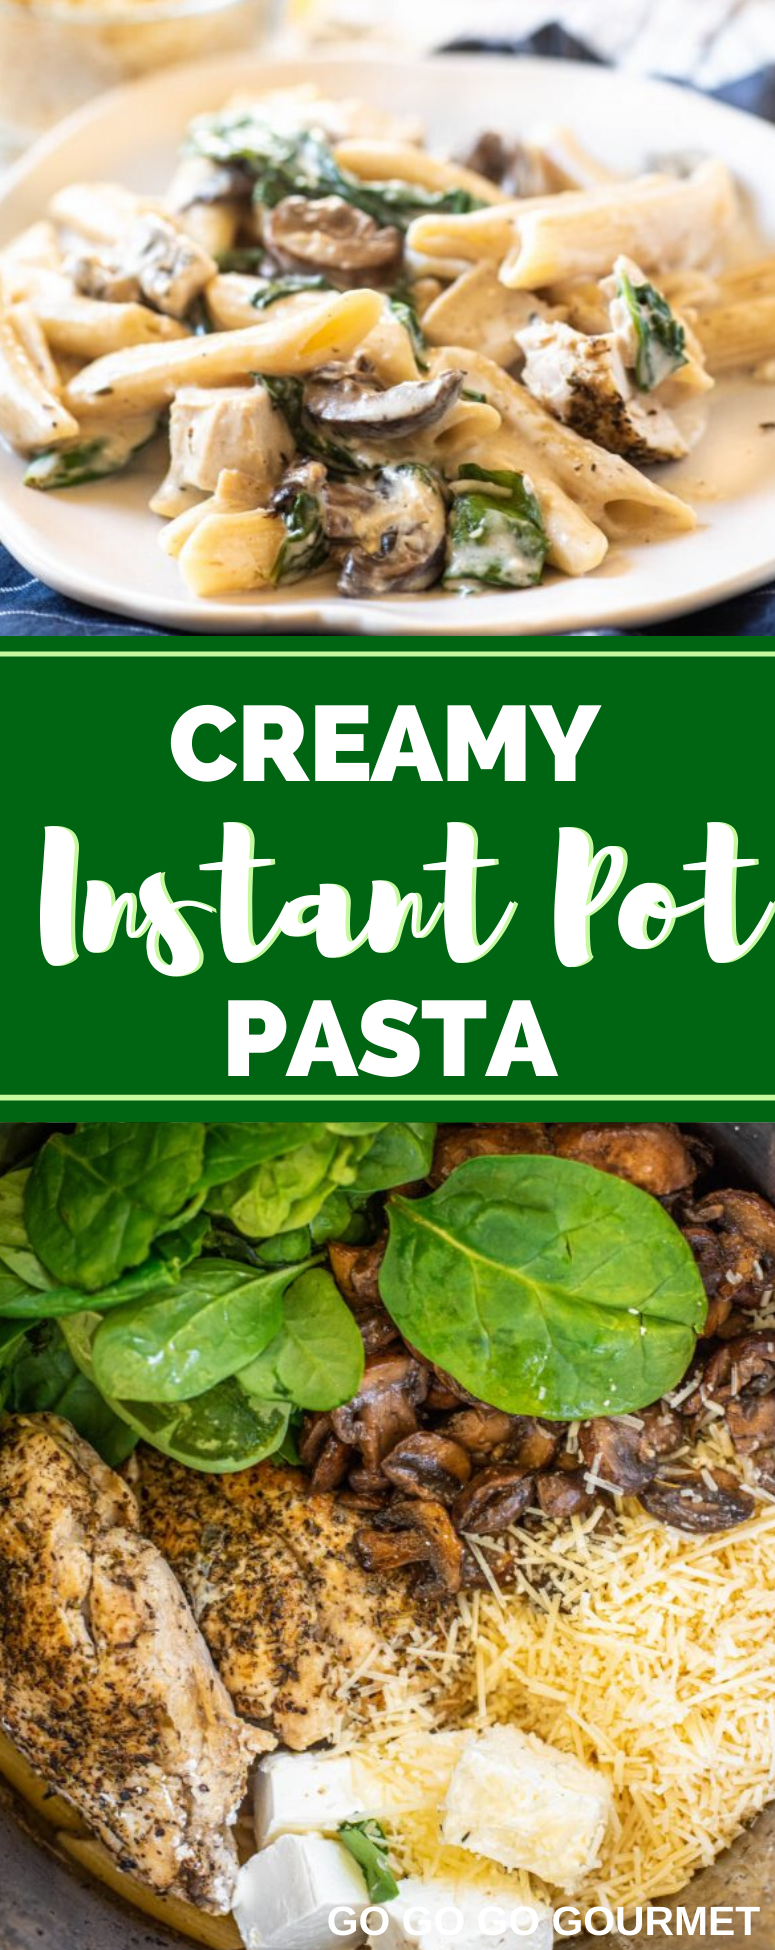 If you've ever wondered how to make pasta in the Instant Pot, look no further than this EASY Creamy Instant Pot Pasta with Chicken & Mushrooms recipe! #gogogogourmet #instantpotpasta #instantpotpastawithchicken #easyinstantpotrecipes #chickendinner via @gogogogourmet